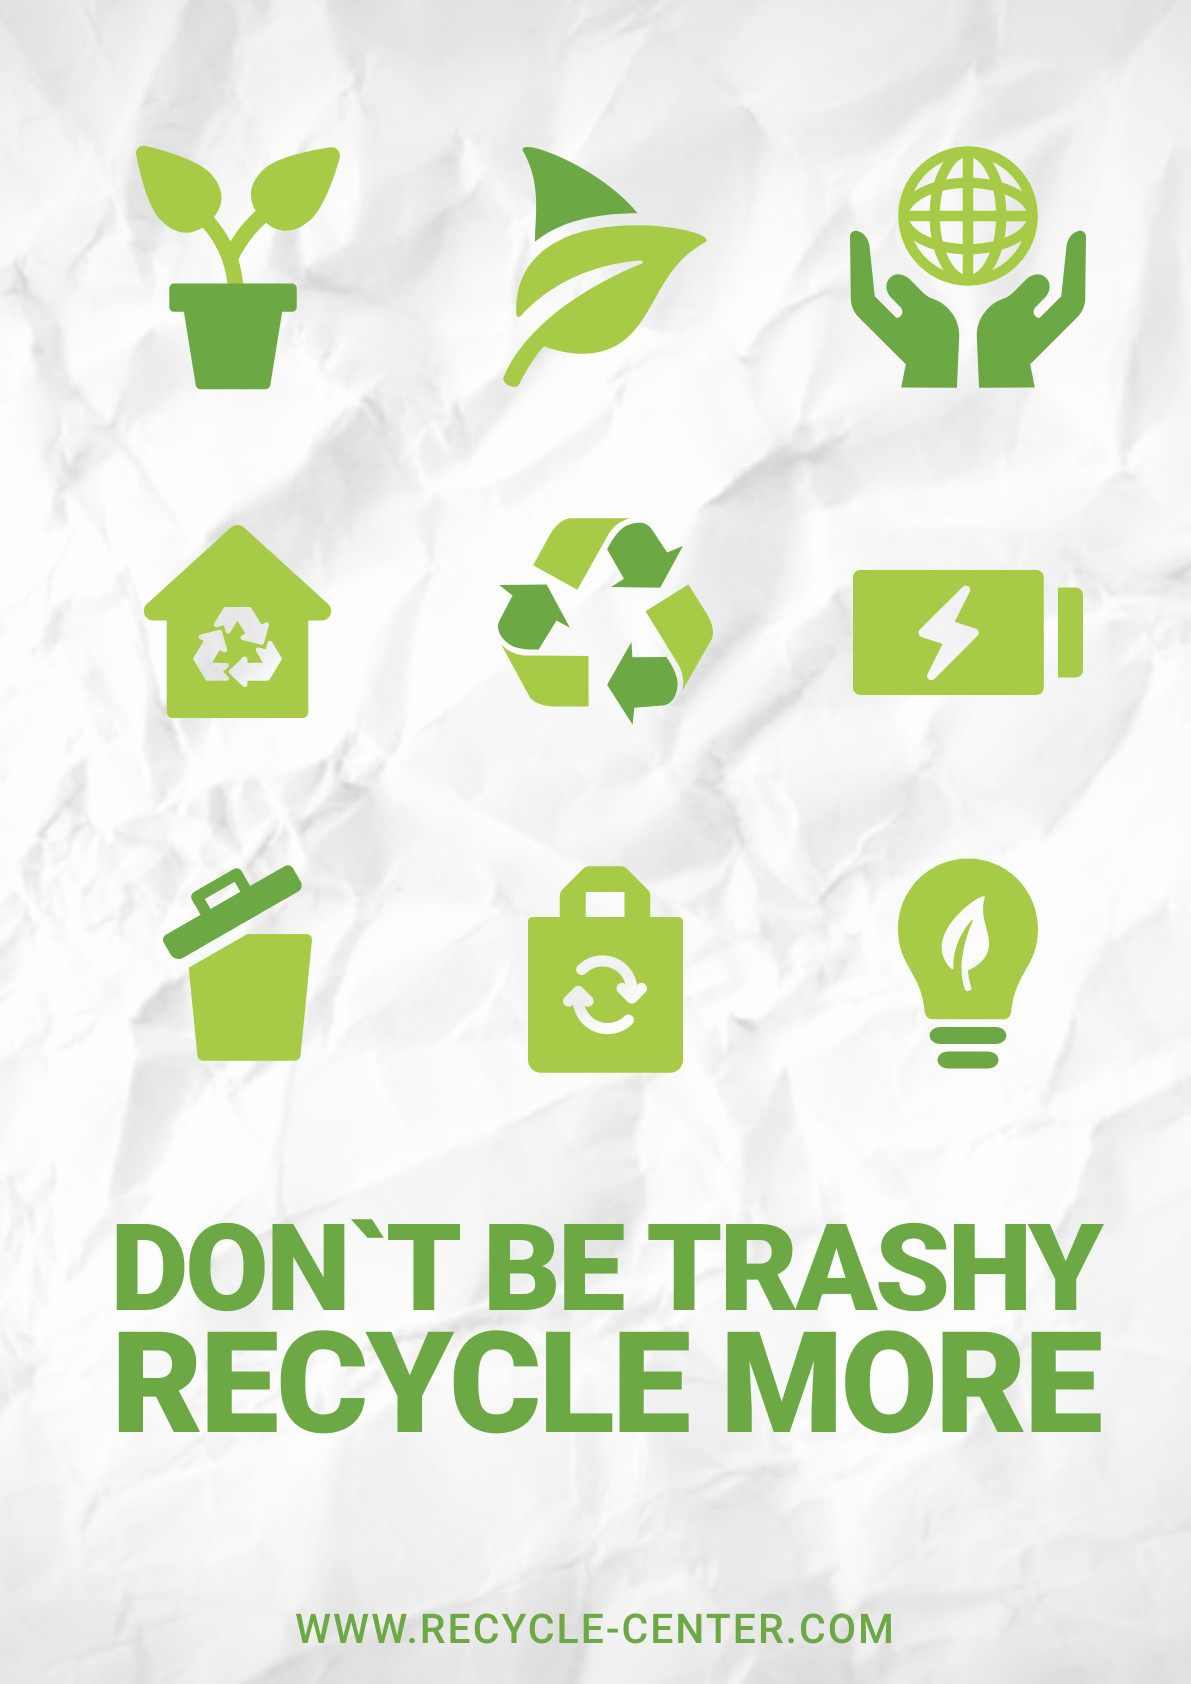 Recycle More Icons – Poster Template